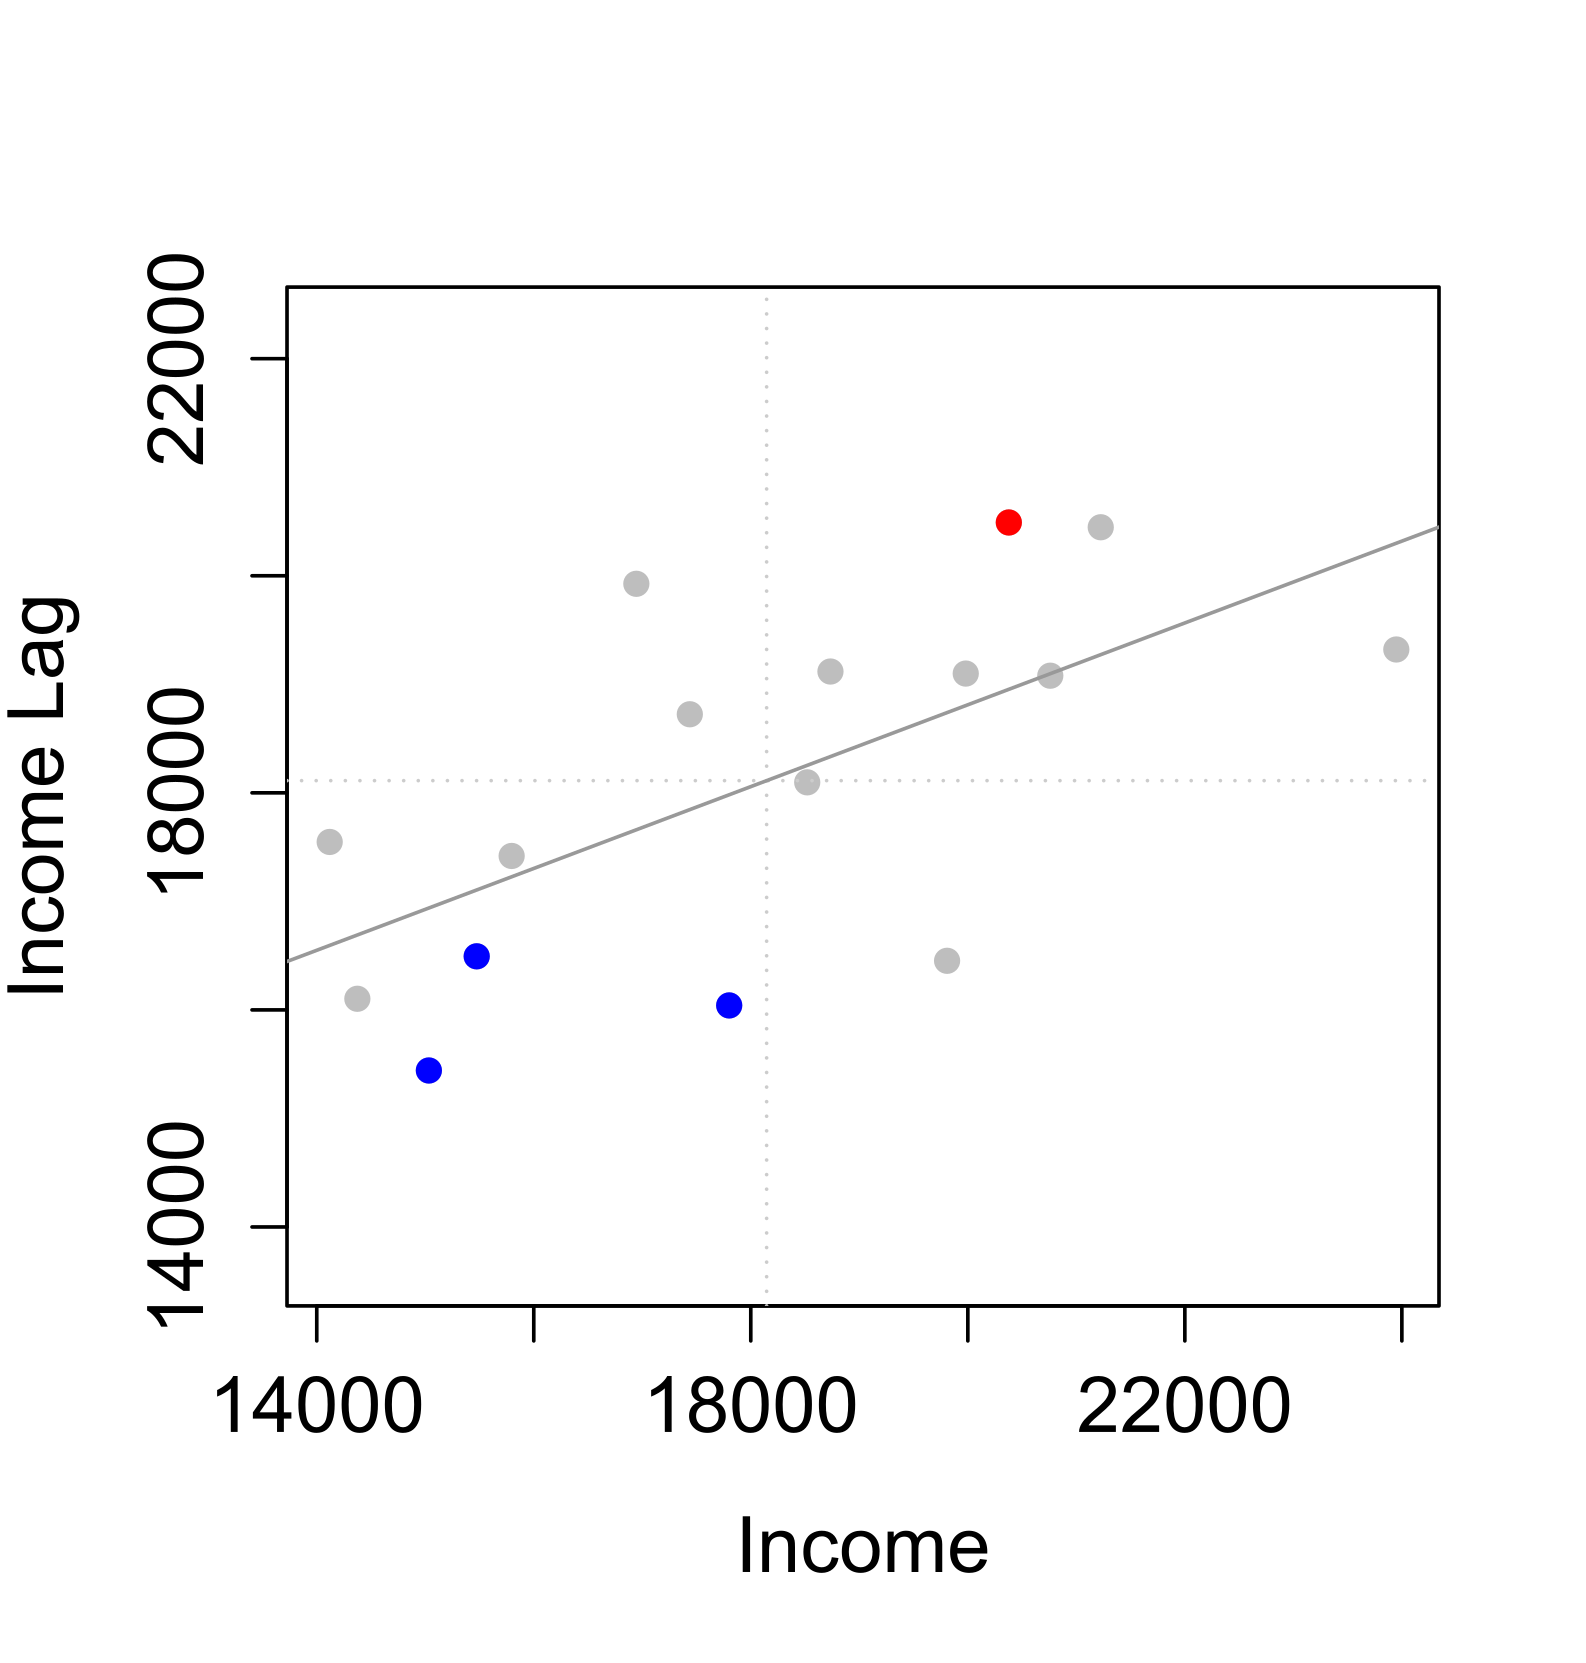 Significantly High-High and Low-Low clusters with P-values less than or equal to 0.5.